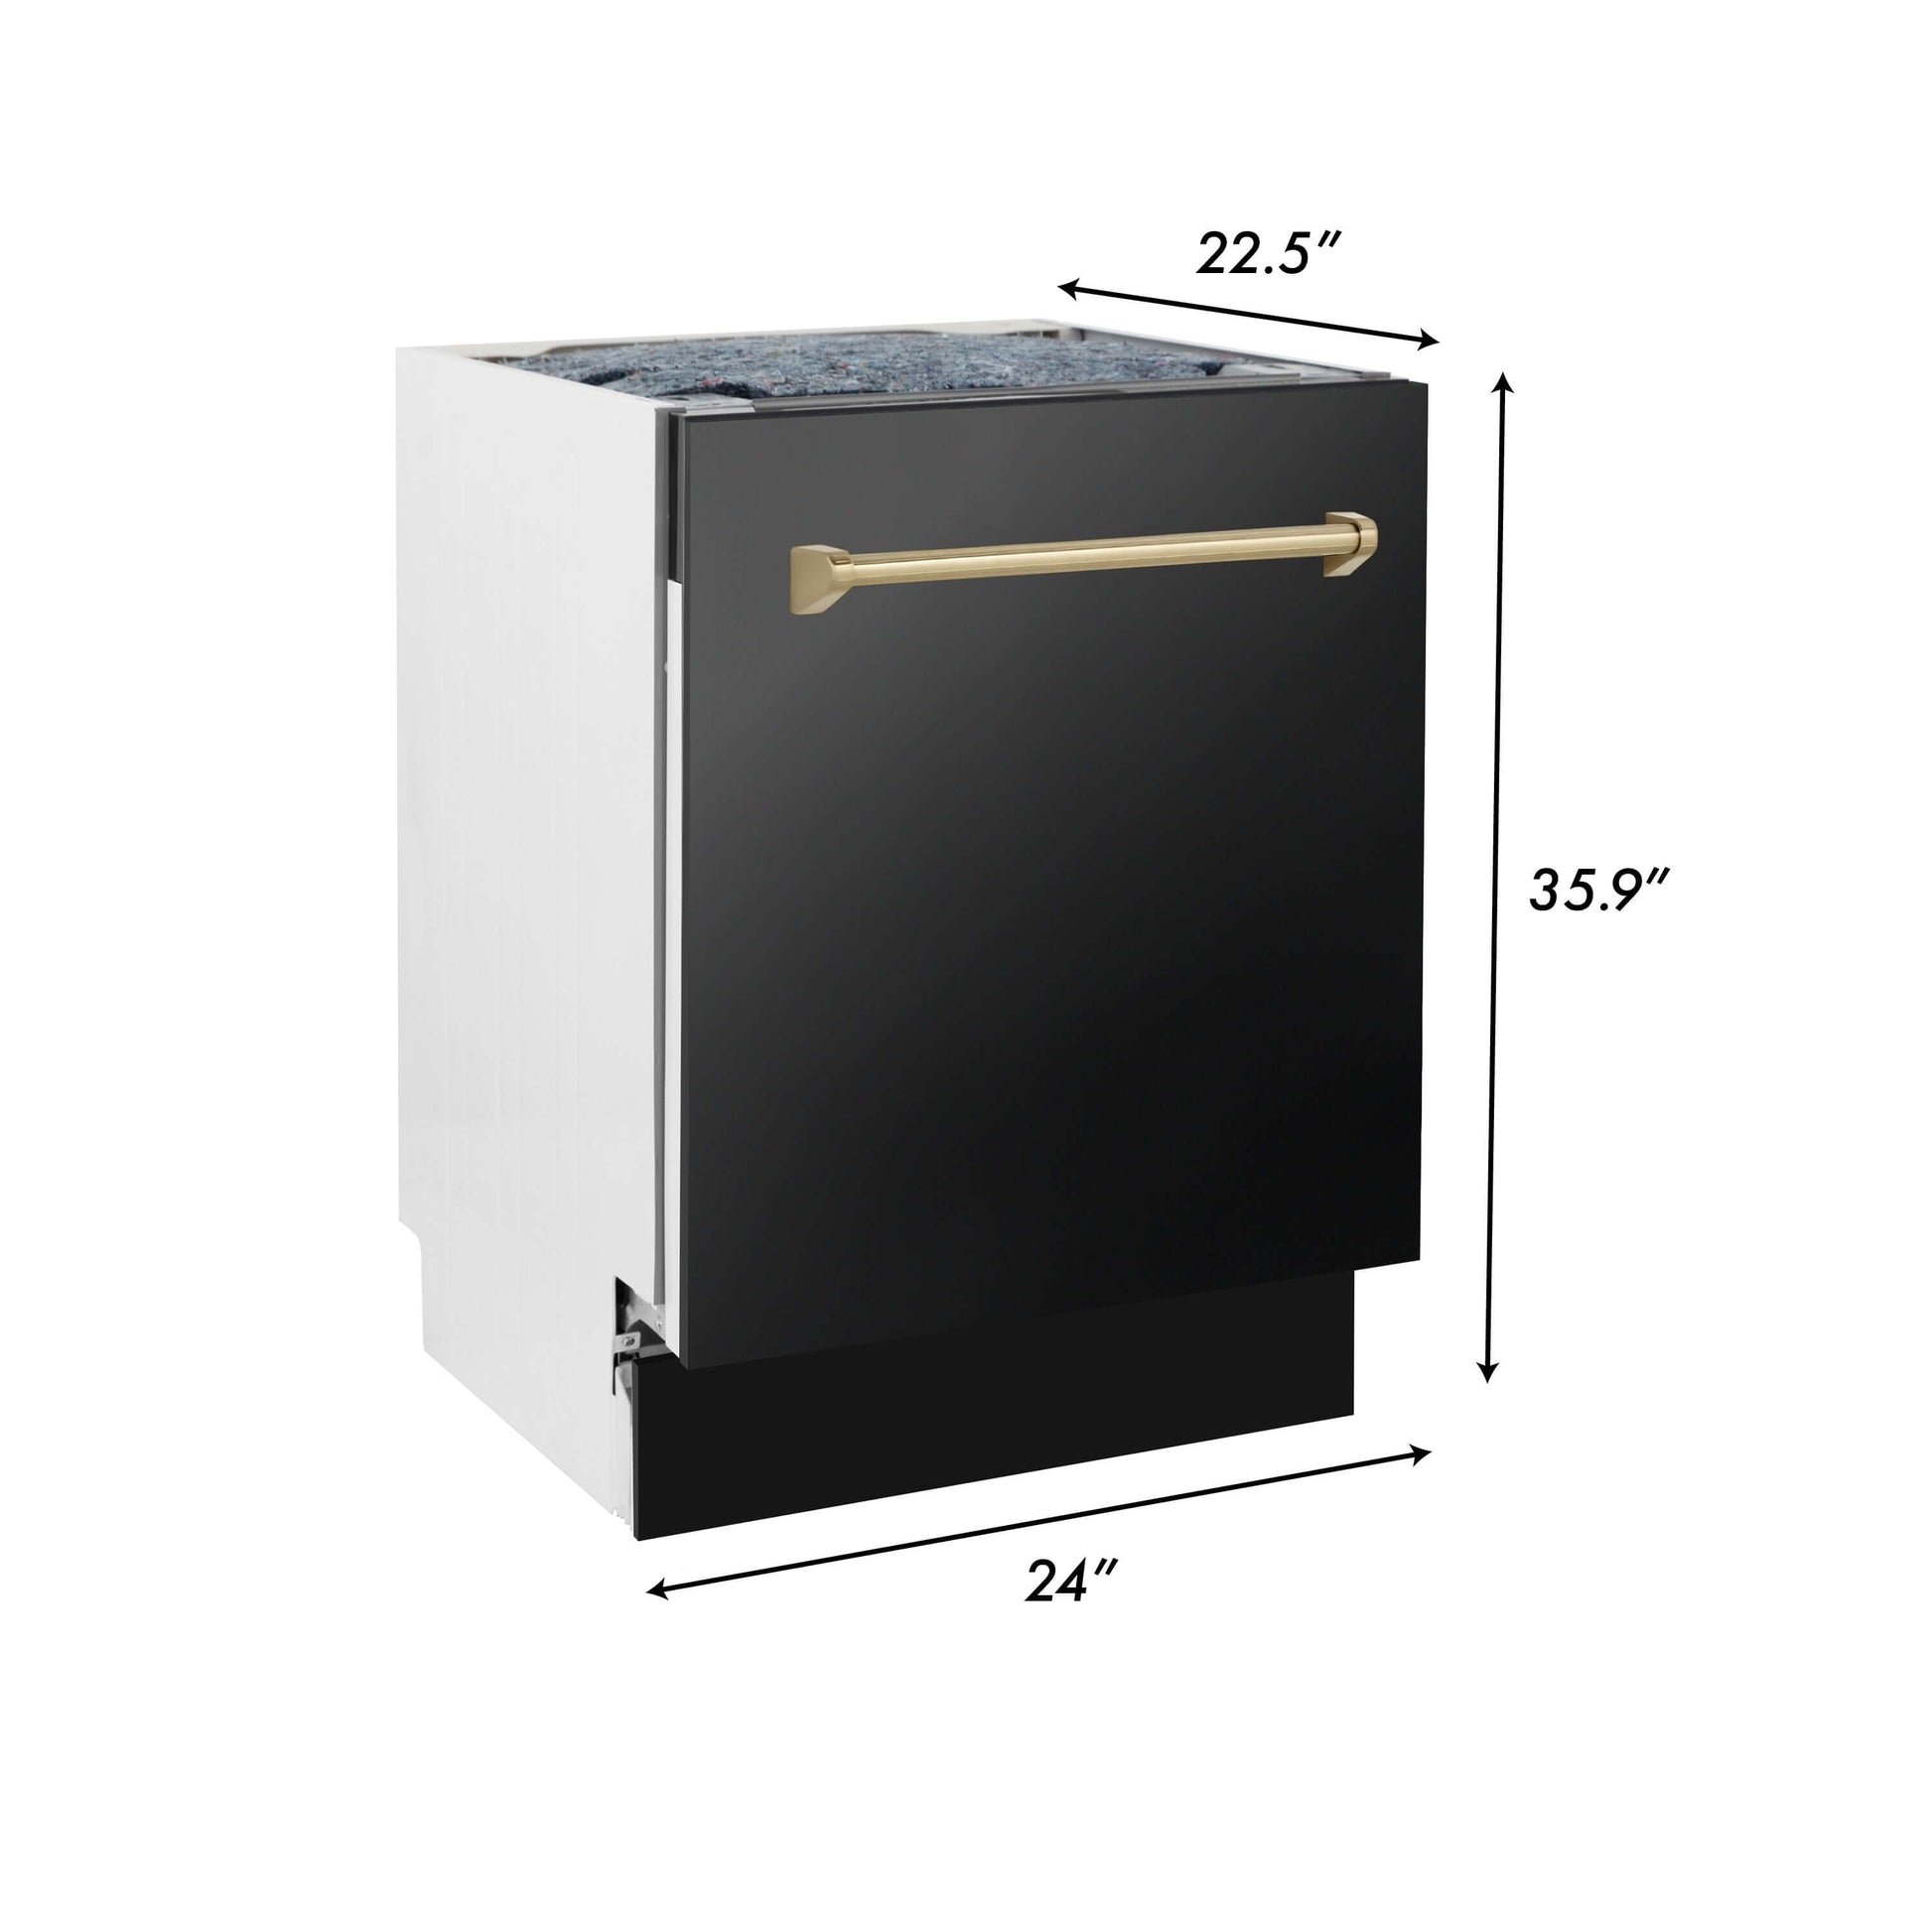 ZLINE 4-Appliance 48" Autograph Edition Kitchen Package with Black Stainless Steel Dual Fuel Range, Range Hood, Dishwasher, and Refrigeration with Champagne Bronze Accents